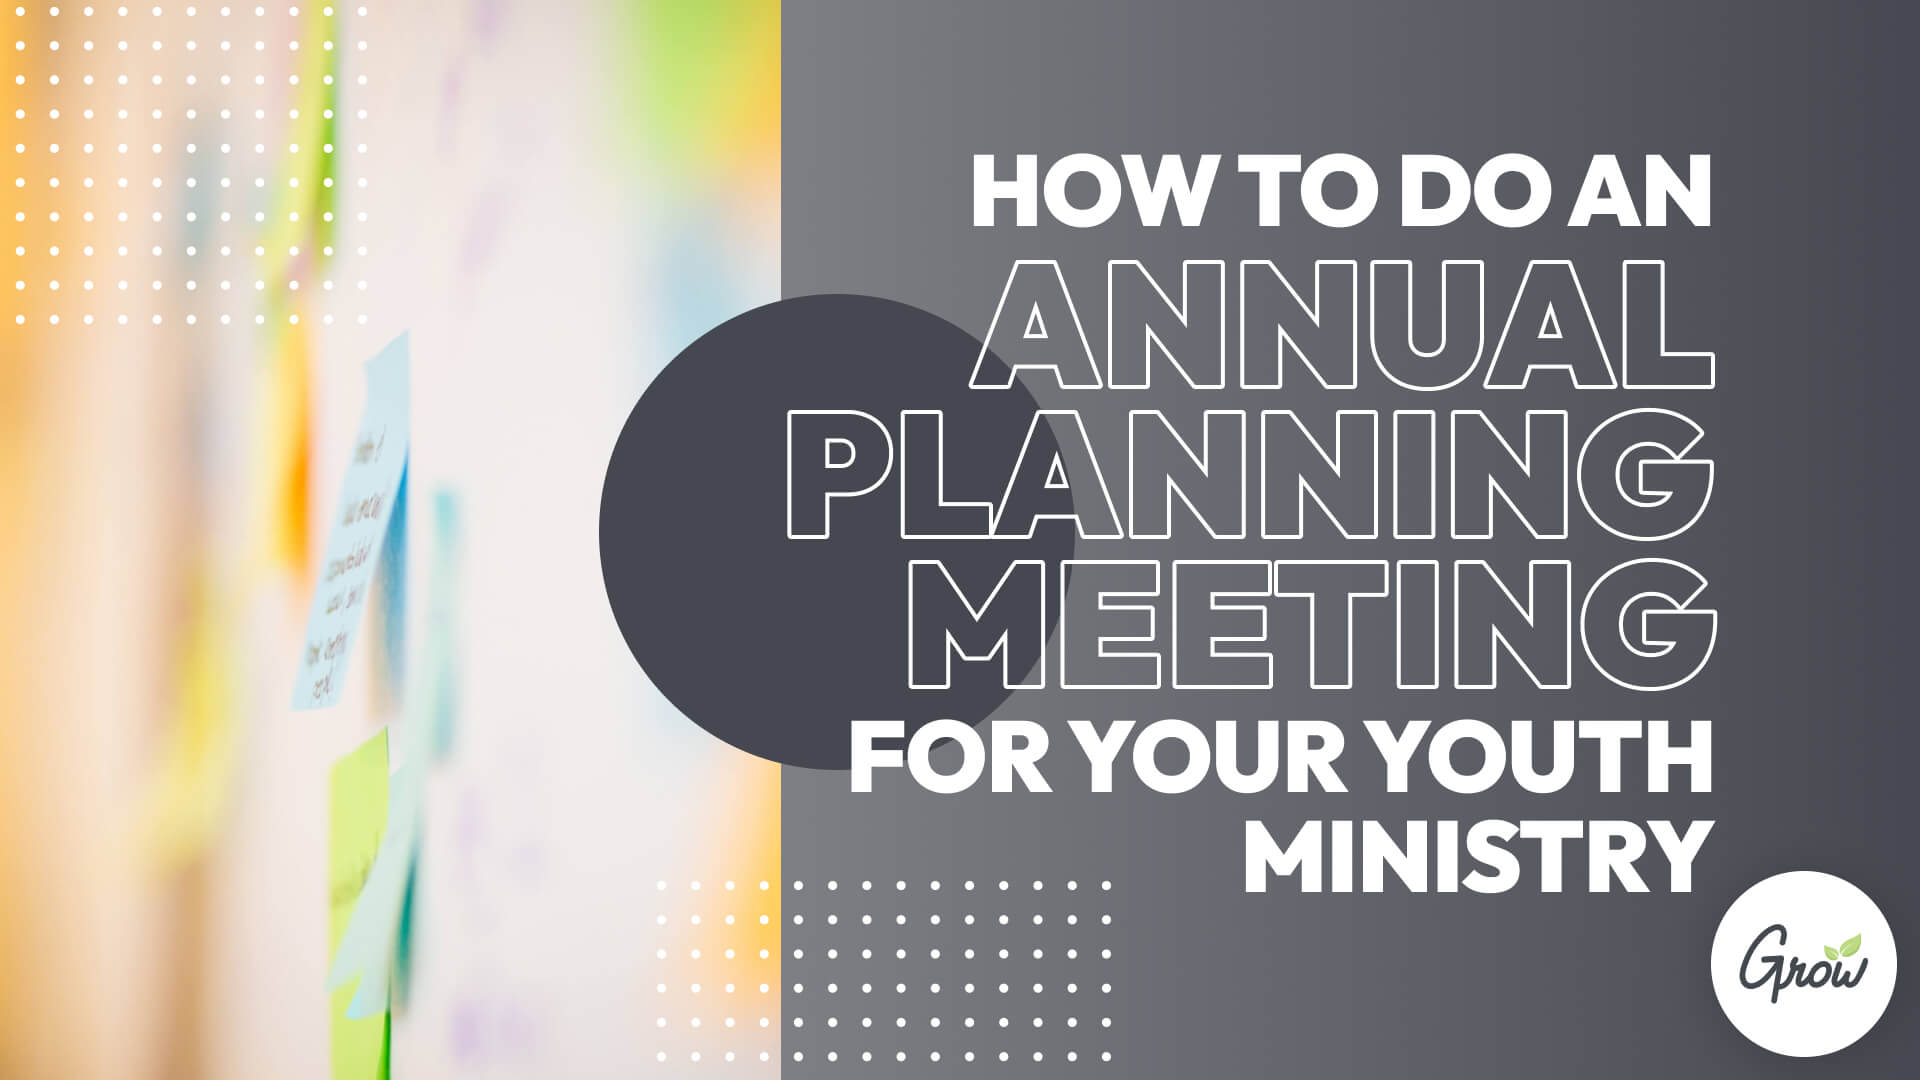 How to Do an Annual Planning Meeting for Your Youth Ministry